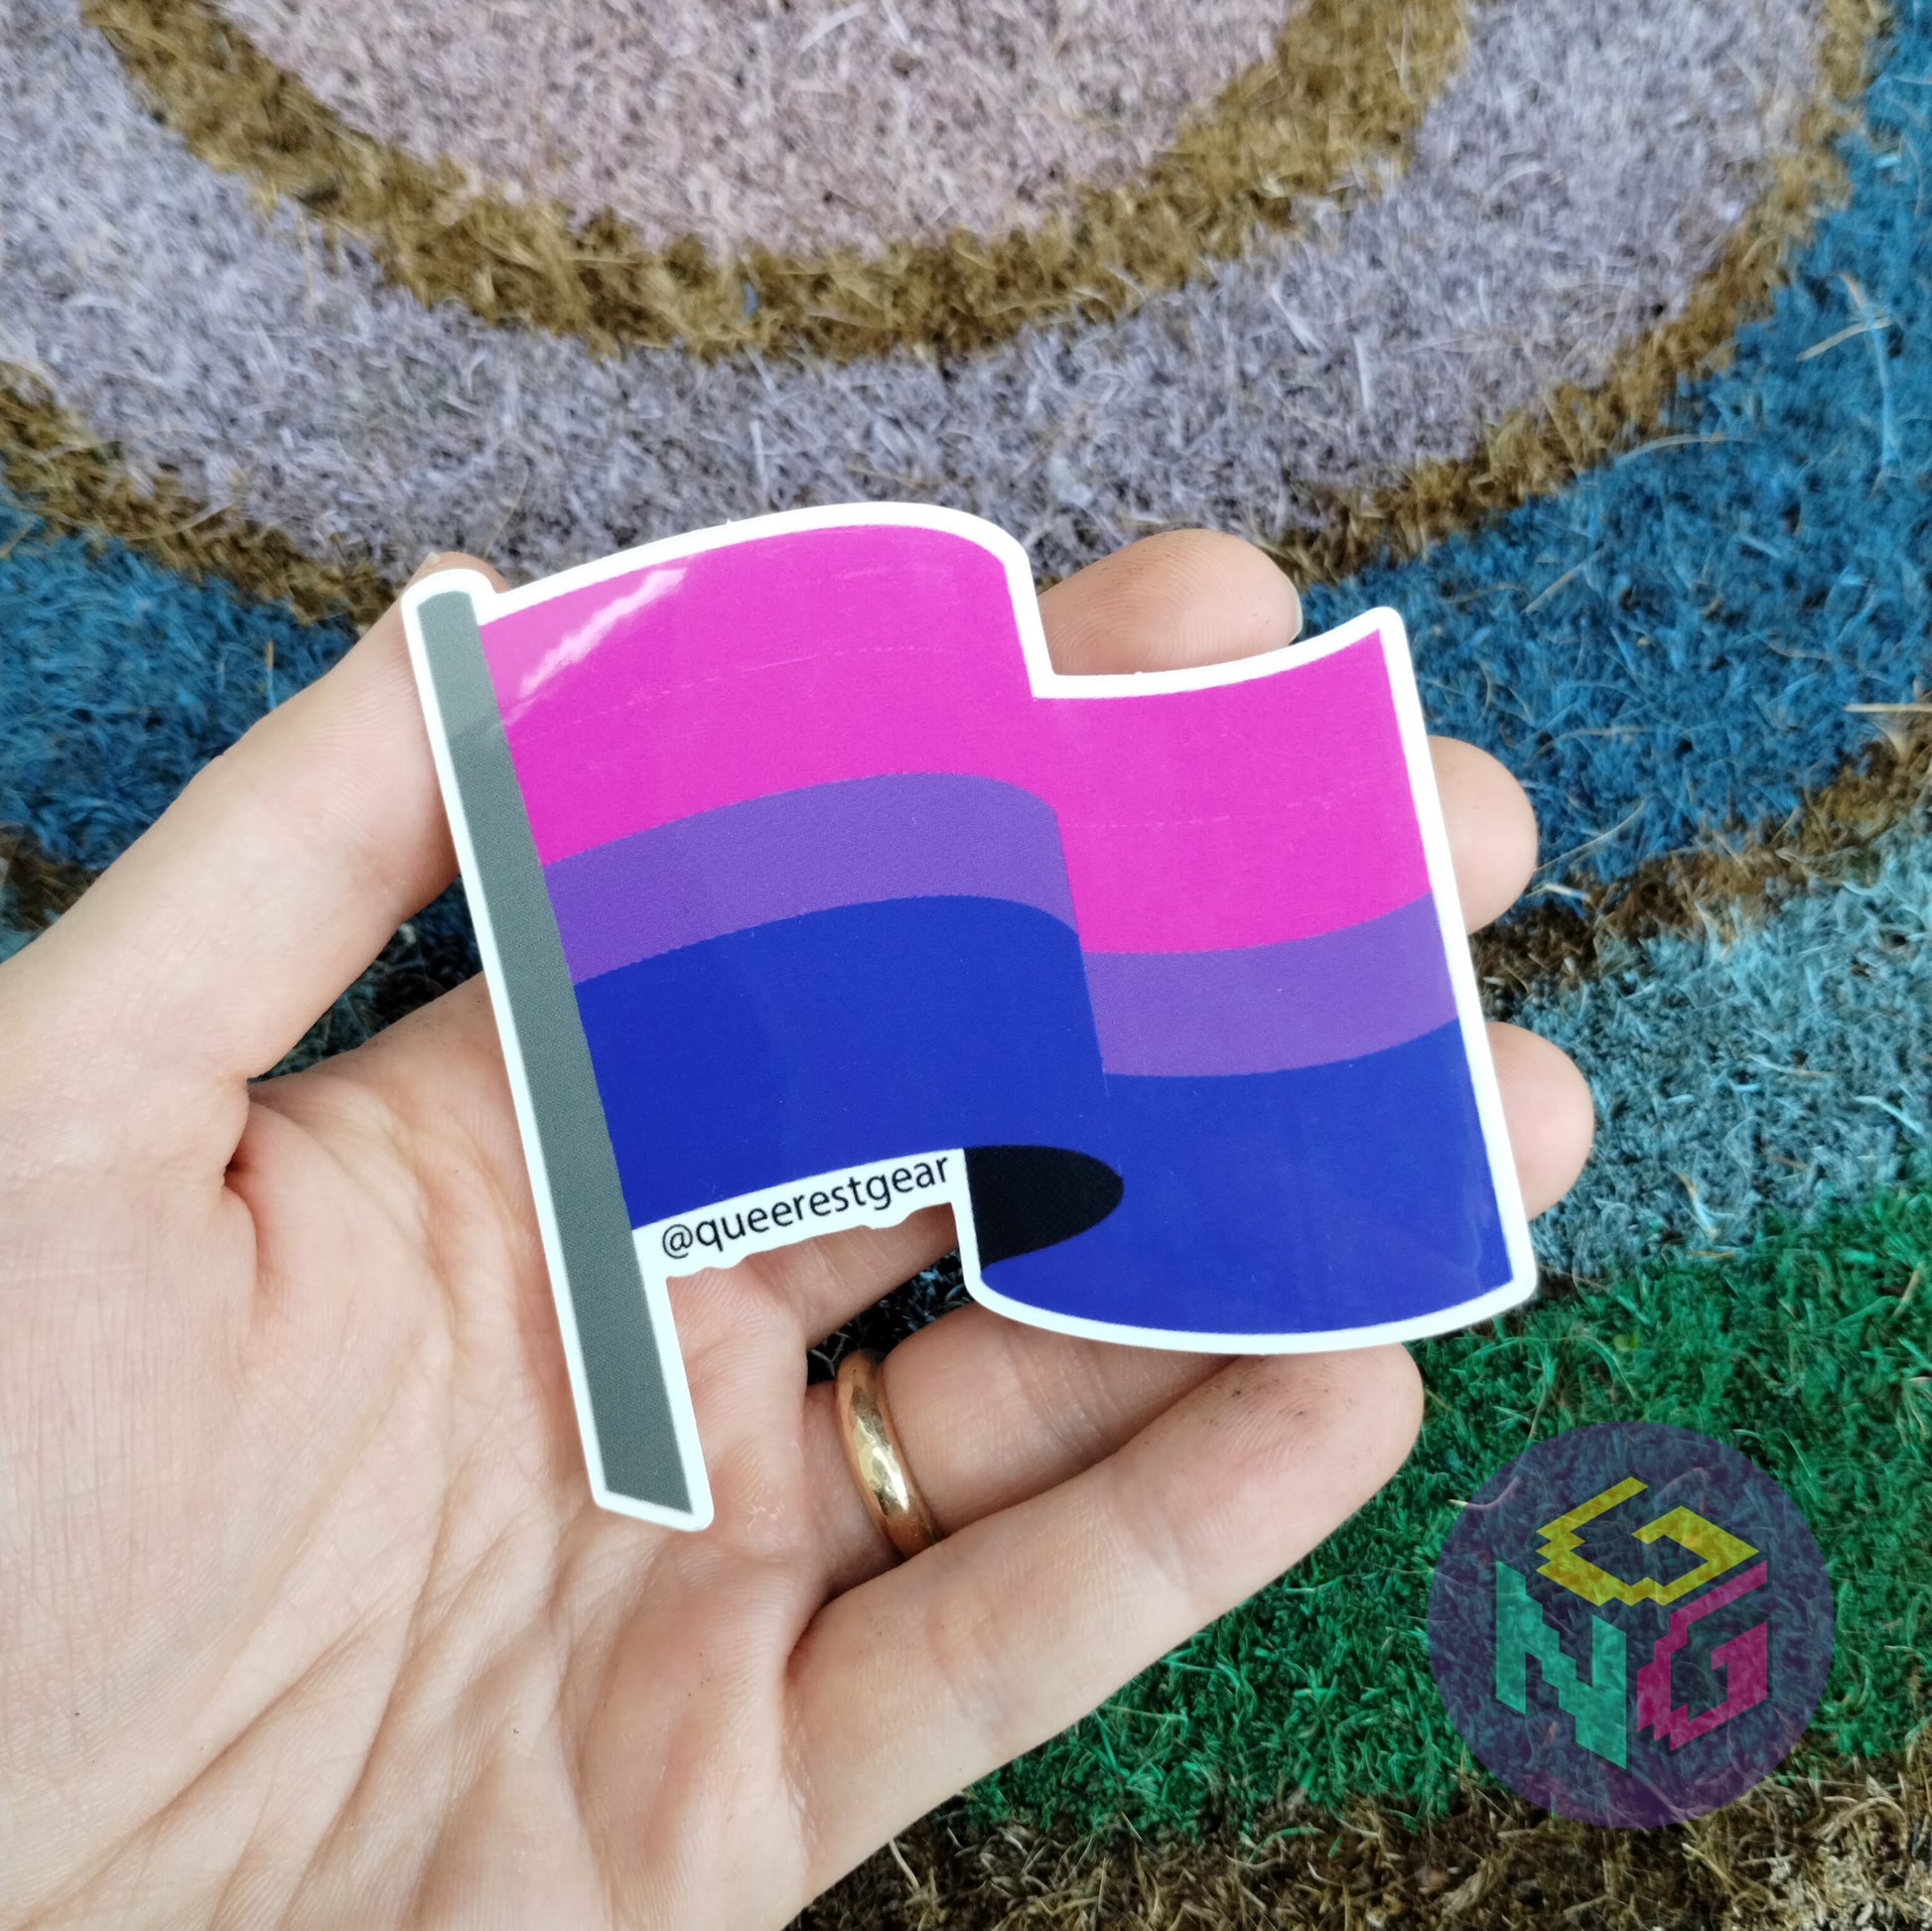 bisexual flag sticker held in hand in front of rainbow welcome mat 